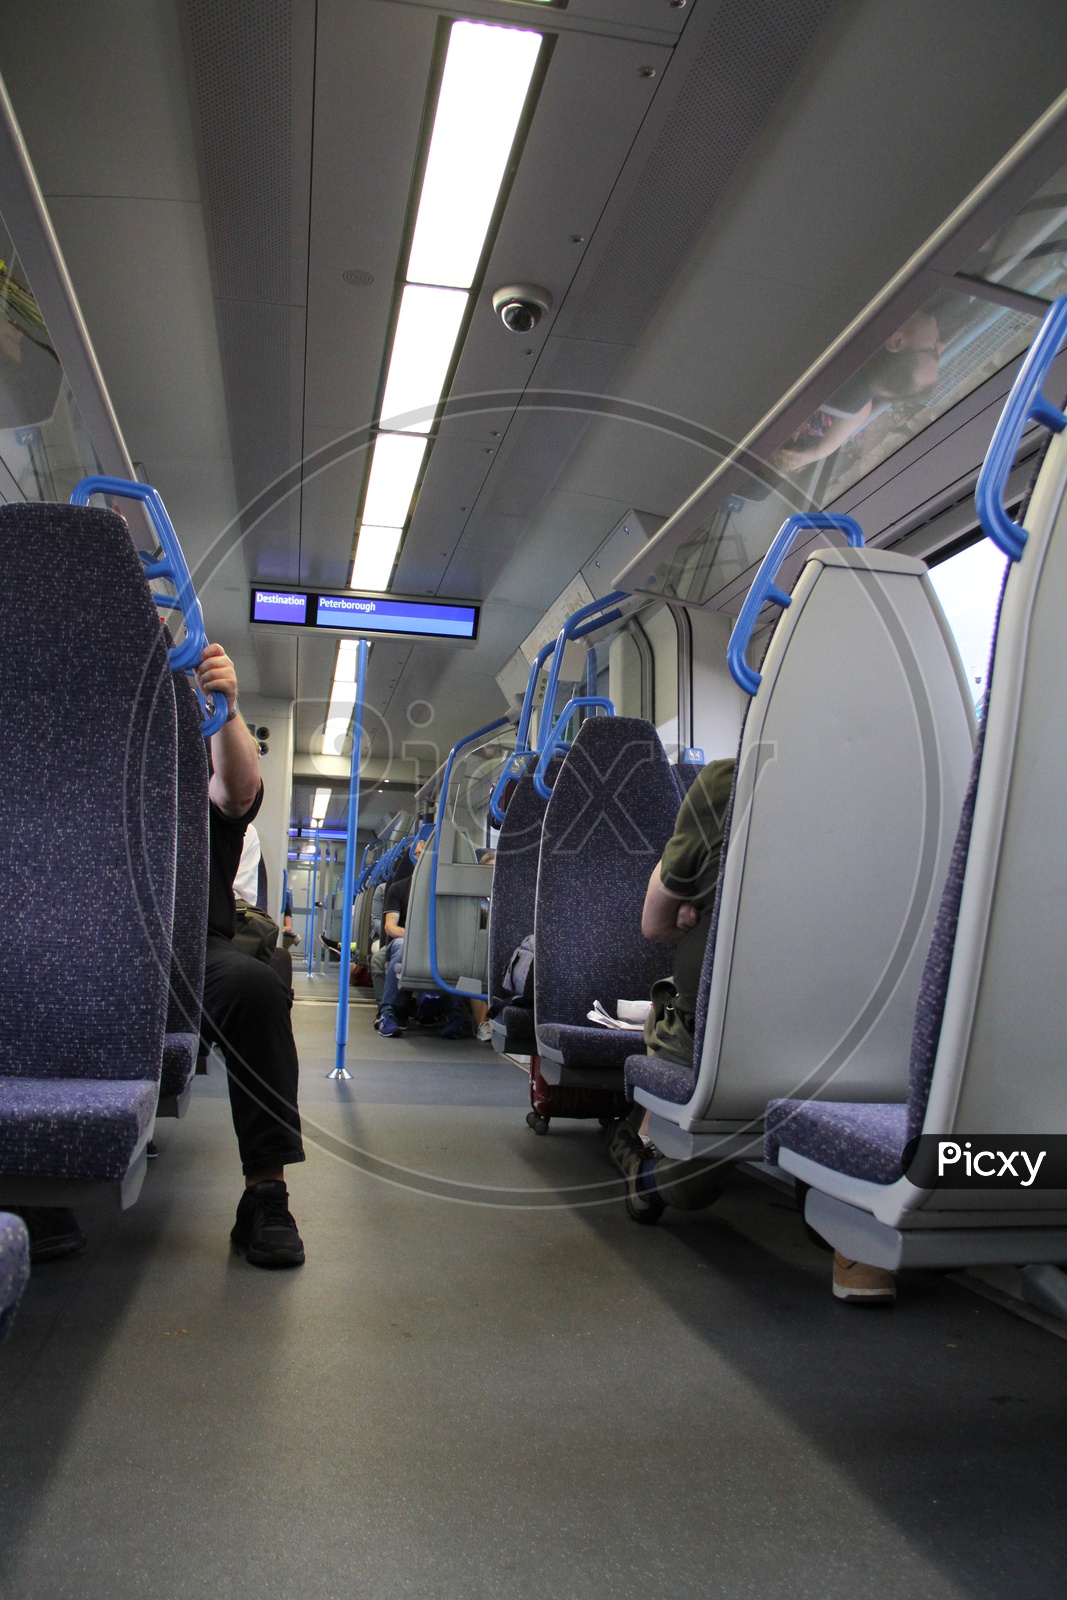 Inside view of Train with CCTV in London